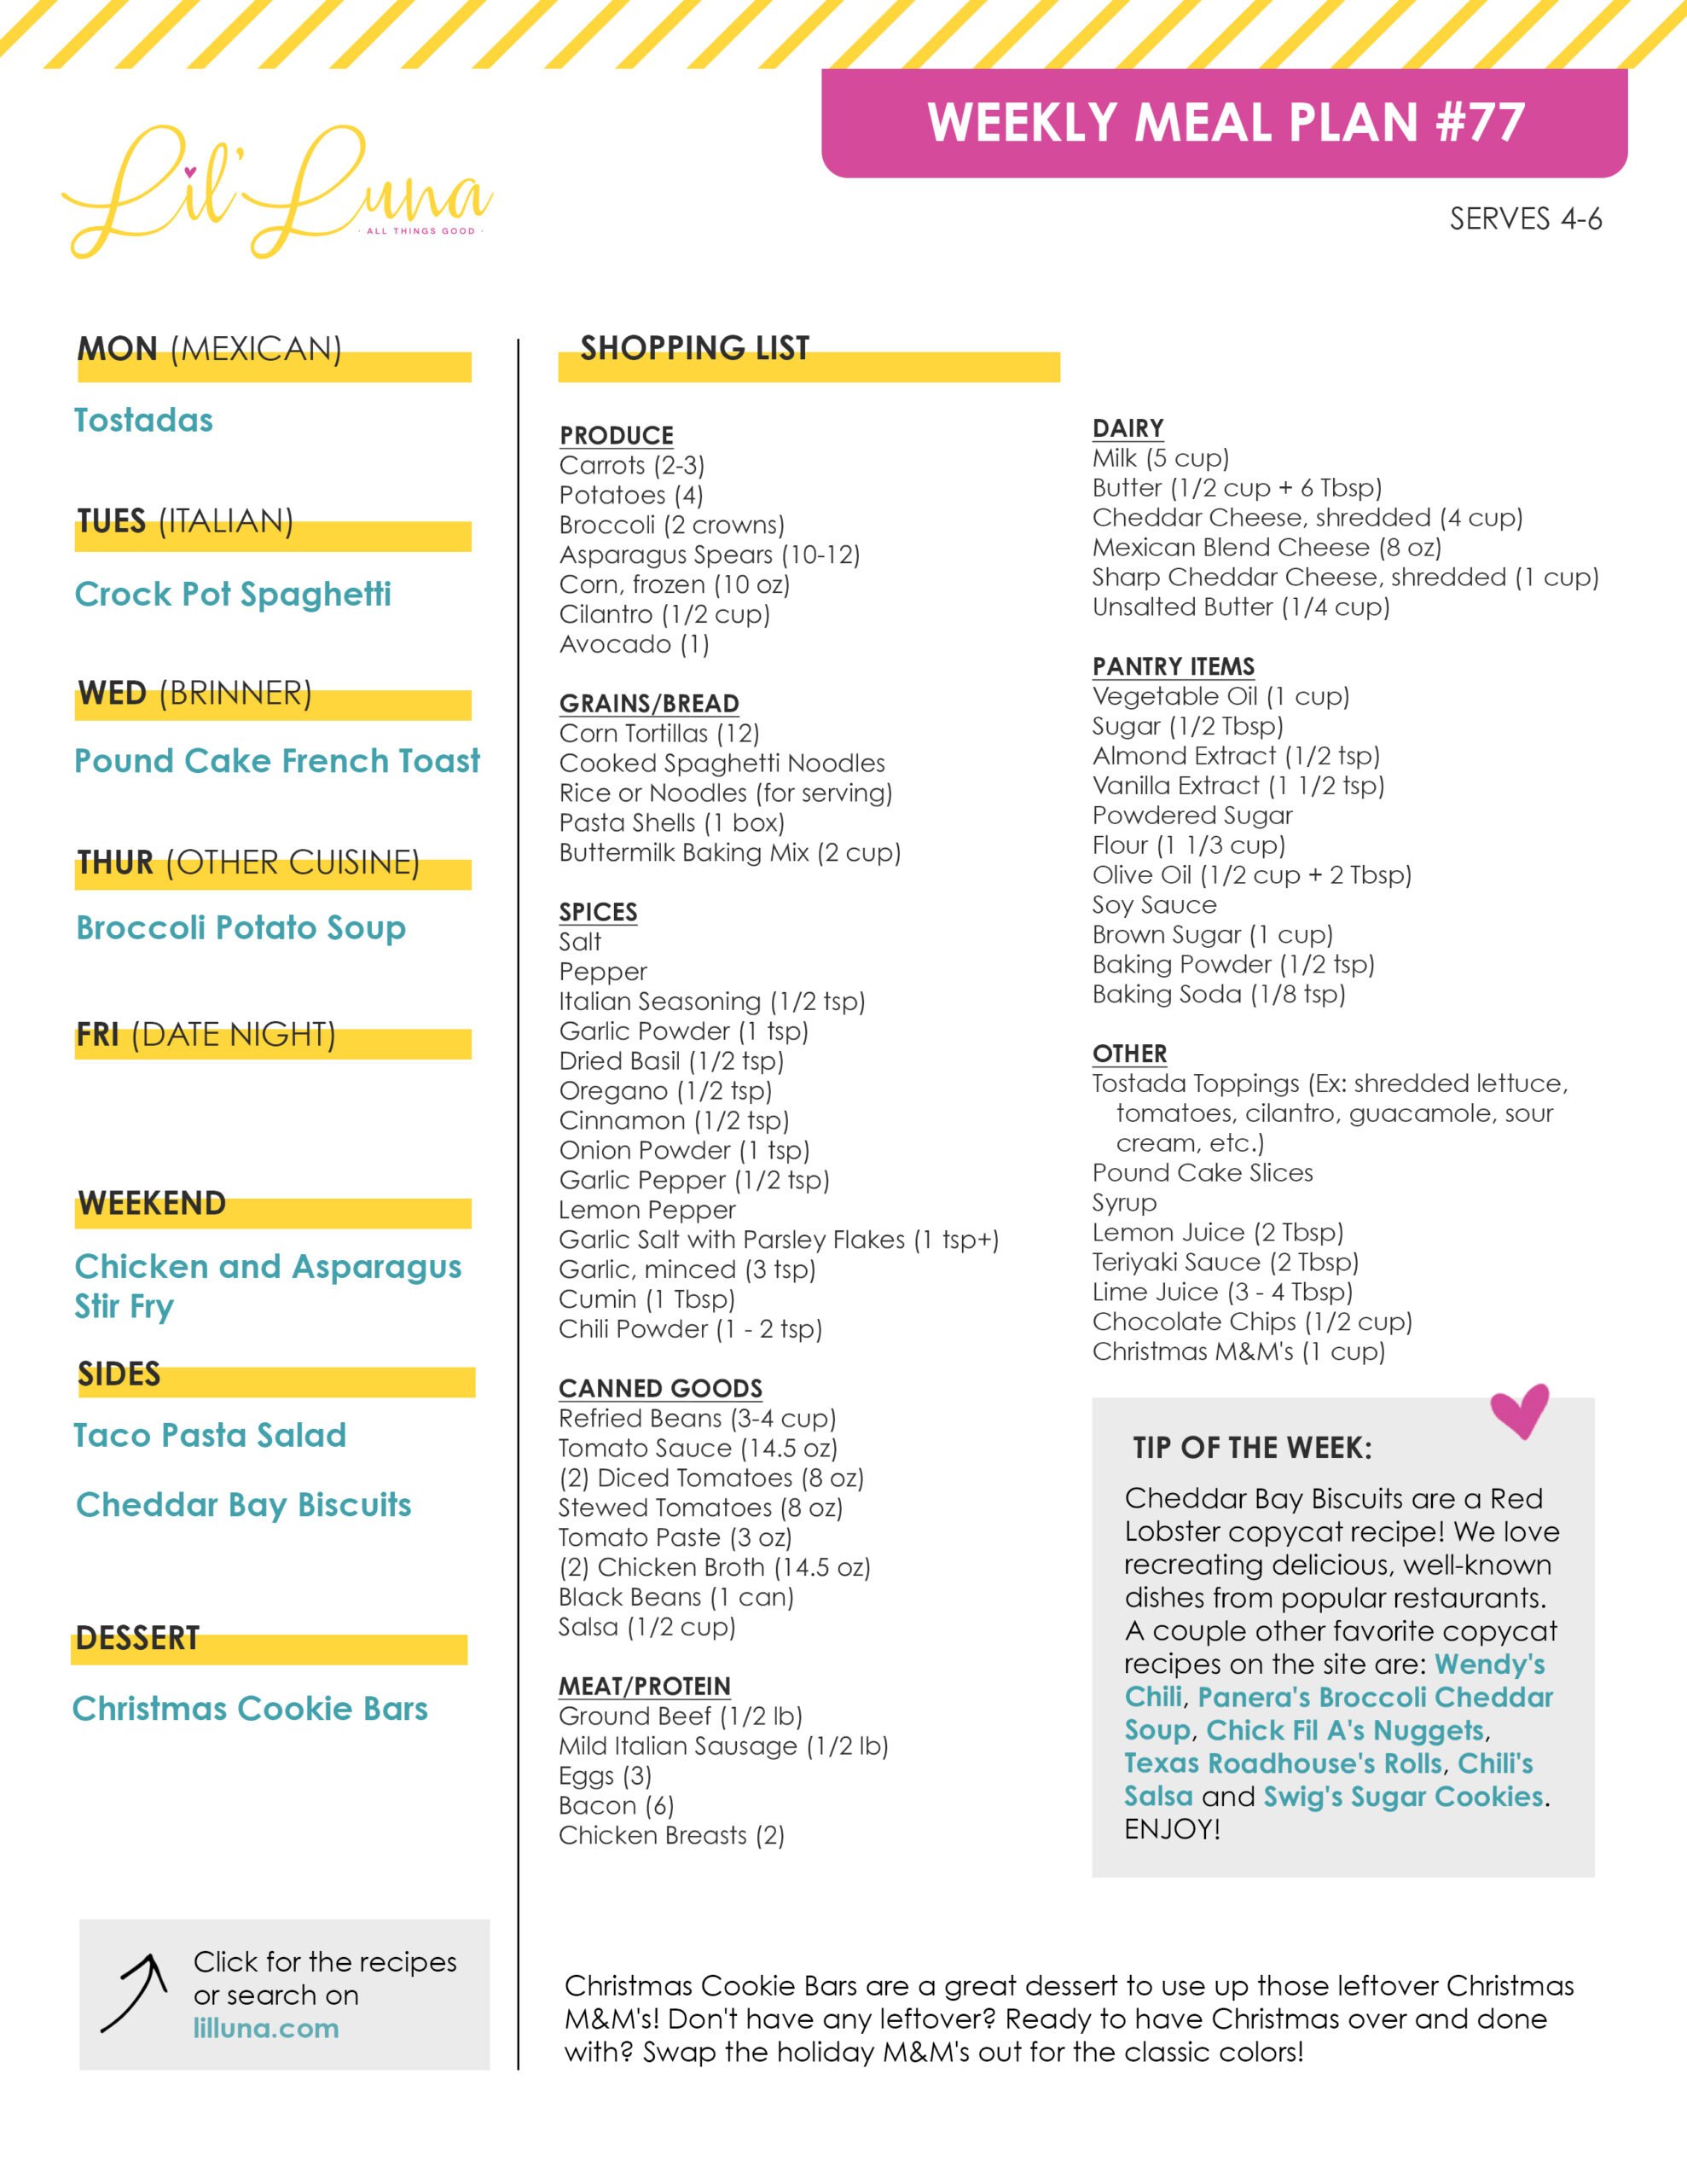 Printable version of Meal Plan #77 with grocery list.